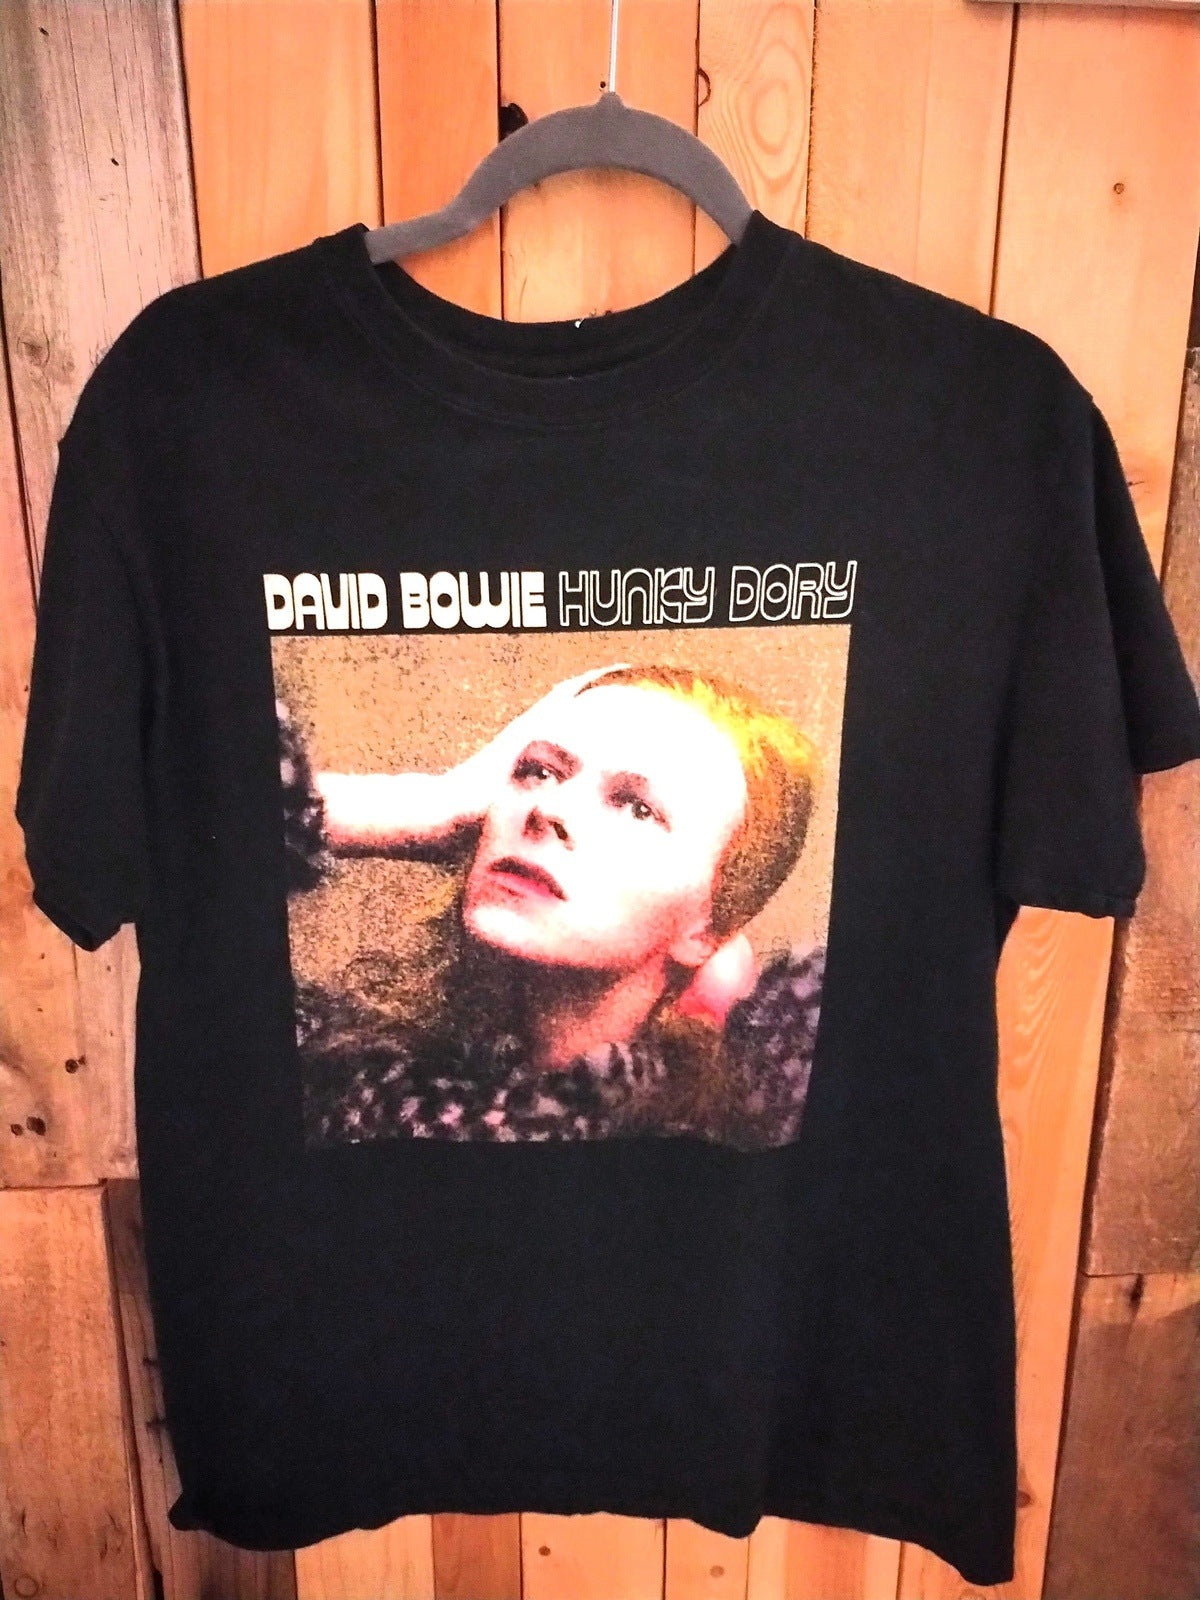 David Bowie Official Merchandise "Hunky Dory" T Shirt Size Medium